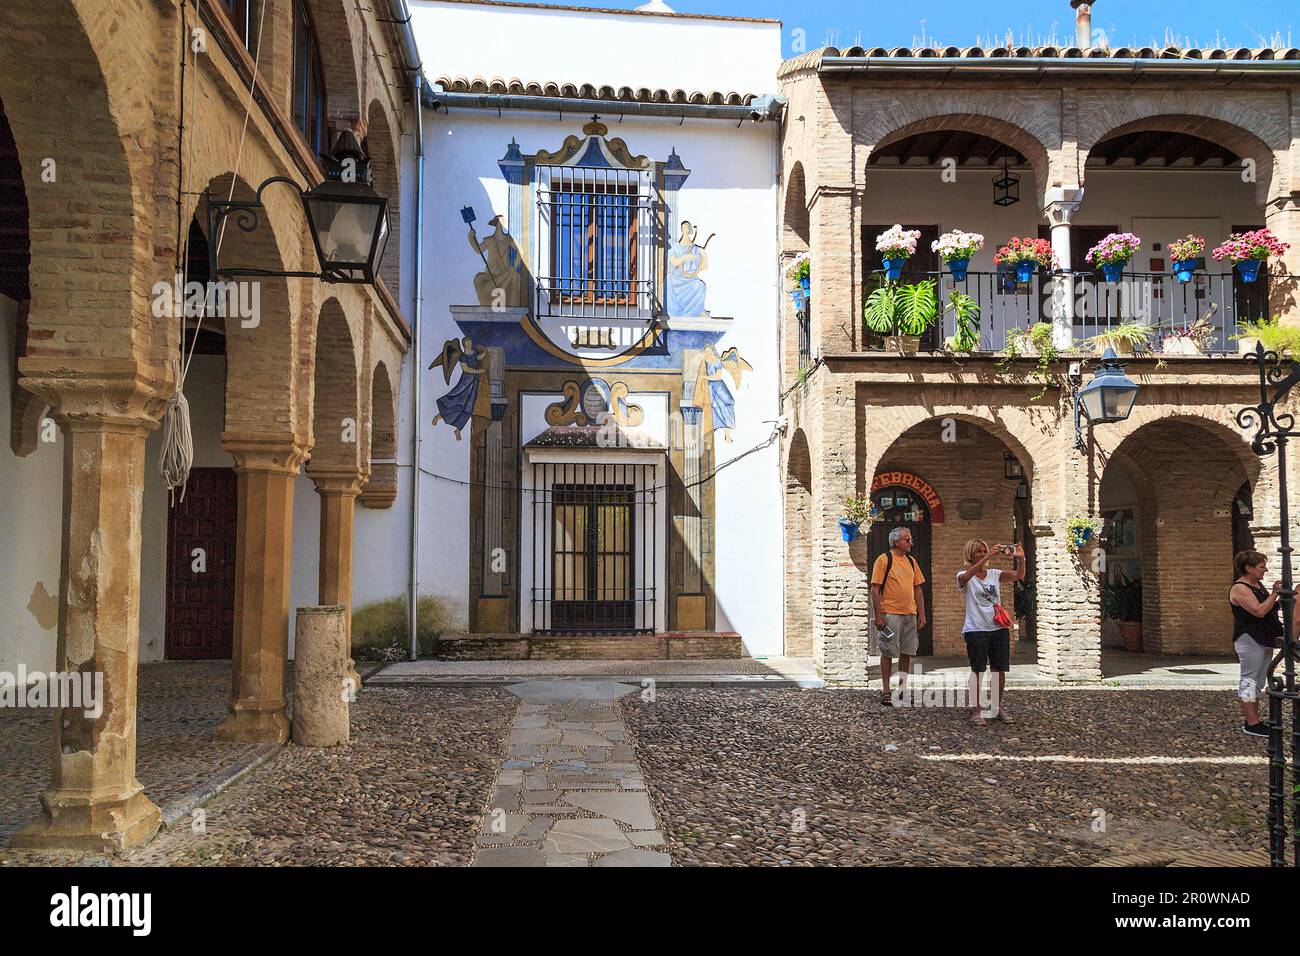 CORDOBA, SPAIN - MAY 23, 2017: This is an one of the courtyards of the old Jewish Quarter (Juderia) of the city. Stock Photo